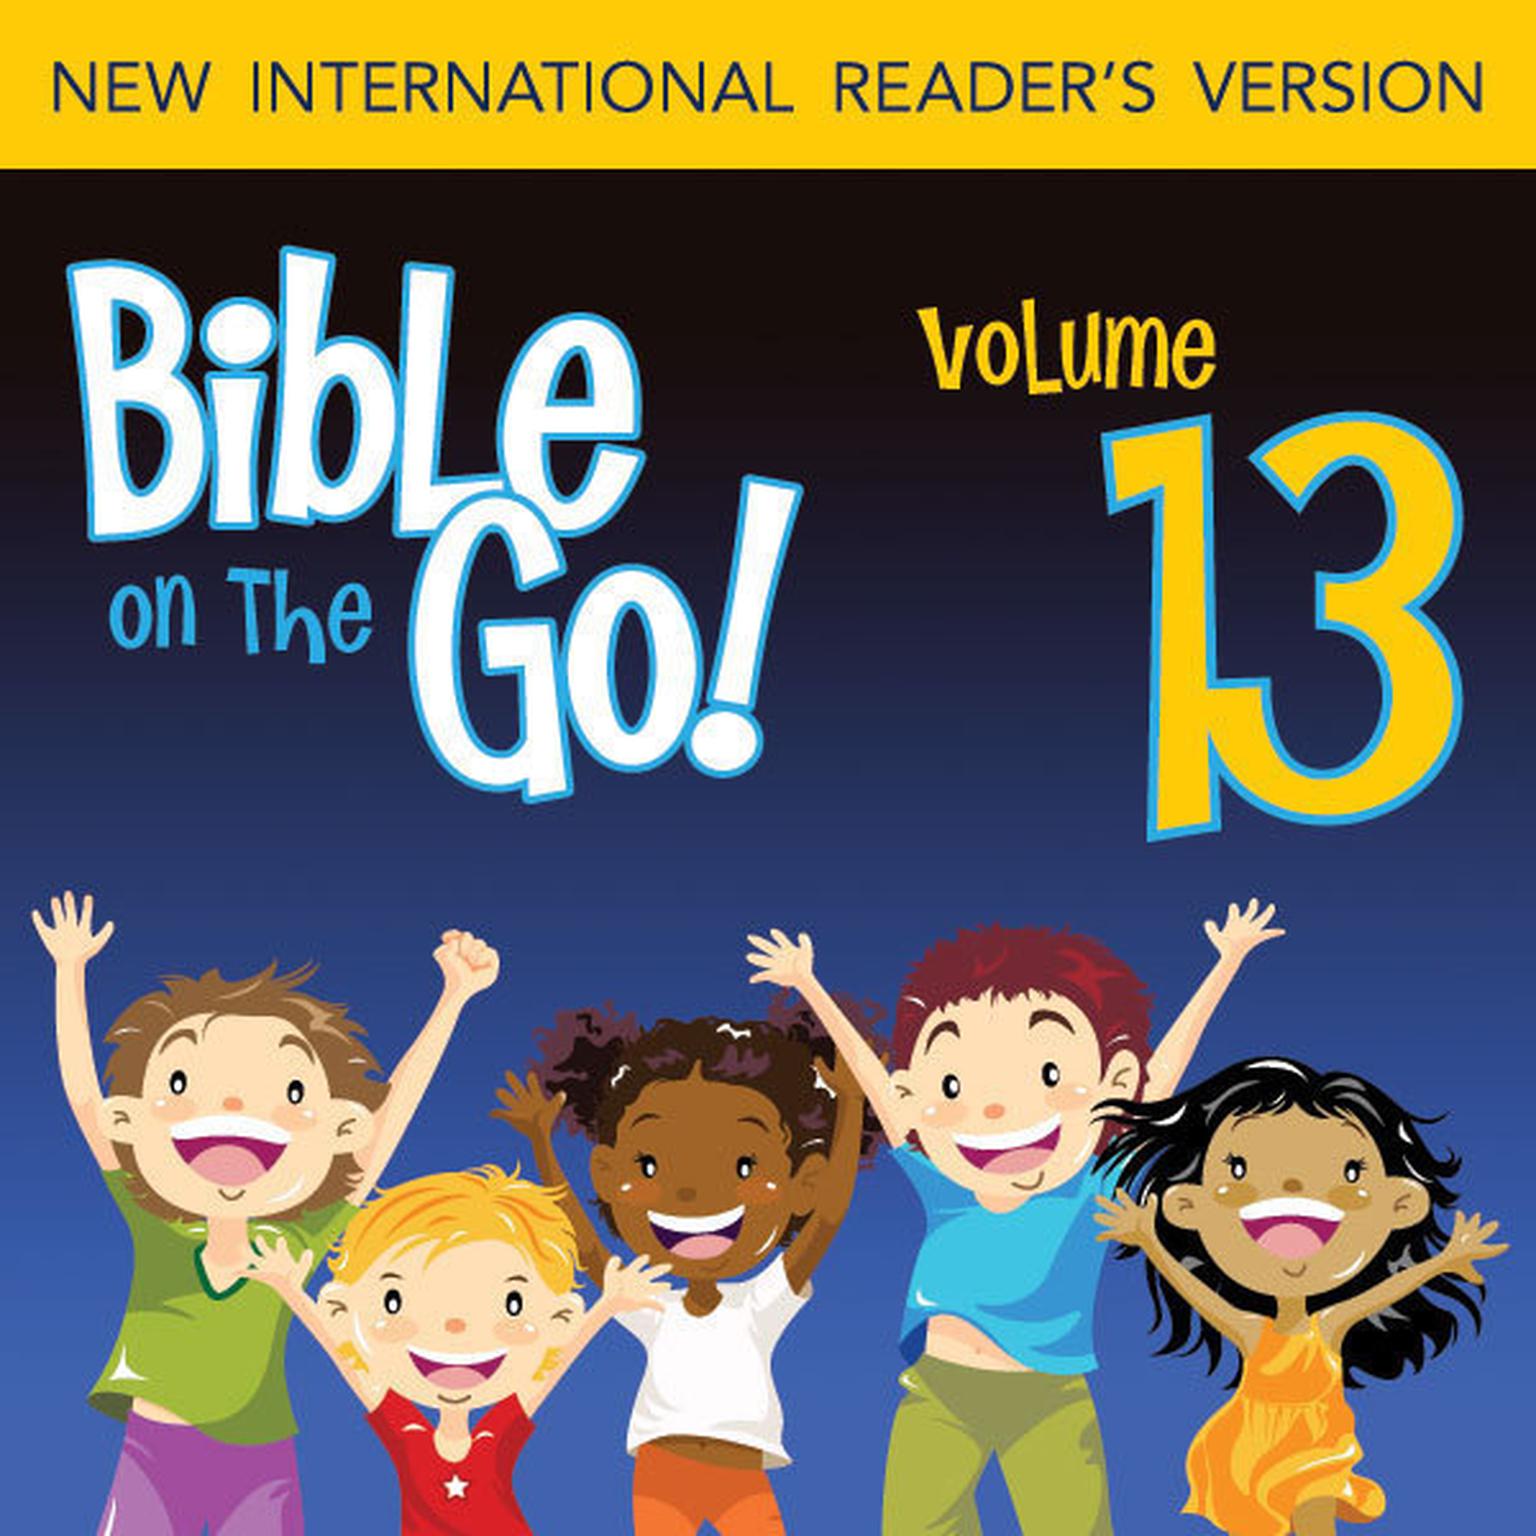 Bible on the Go Audio Bible - New International Readers Version, NIrV: Vol. 13 The Stories of Gideon and Samson (Judges 6-8, 13, 16): The Stories of Gideon and Samson Audiobook, by Zondervan